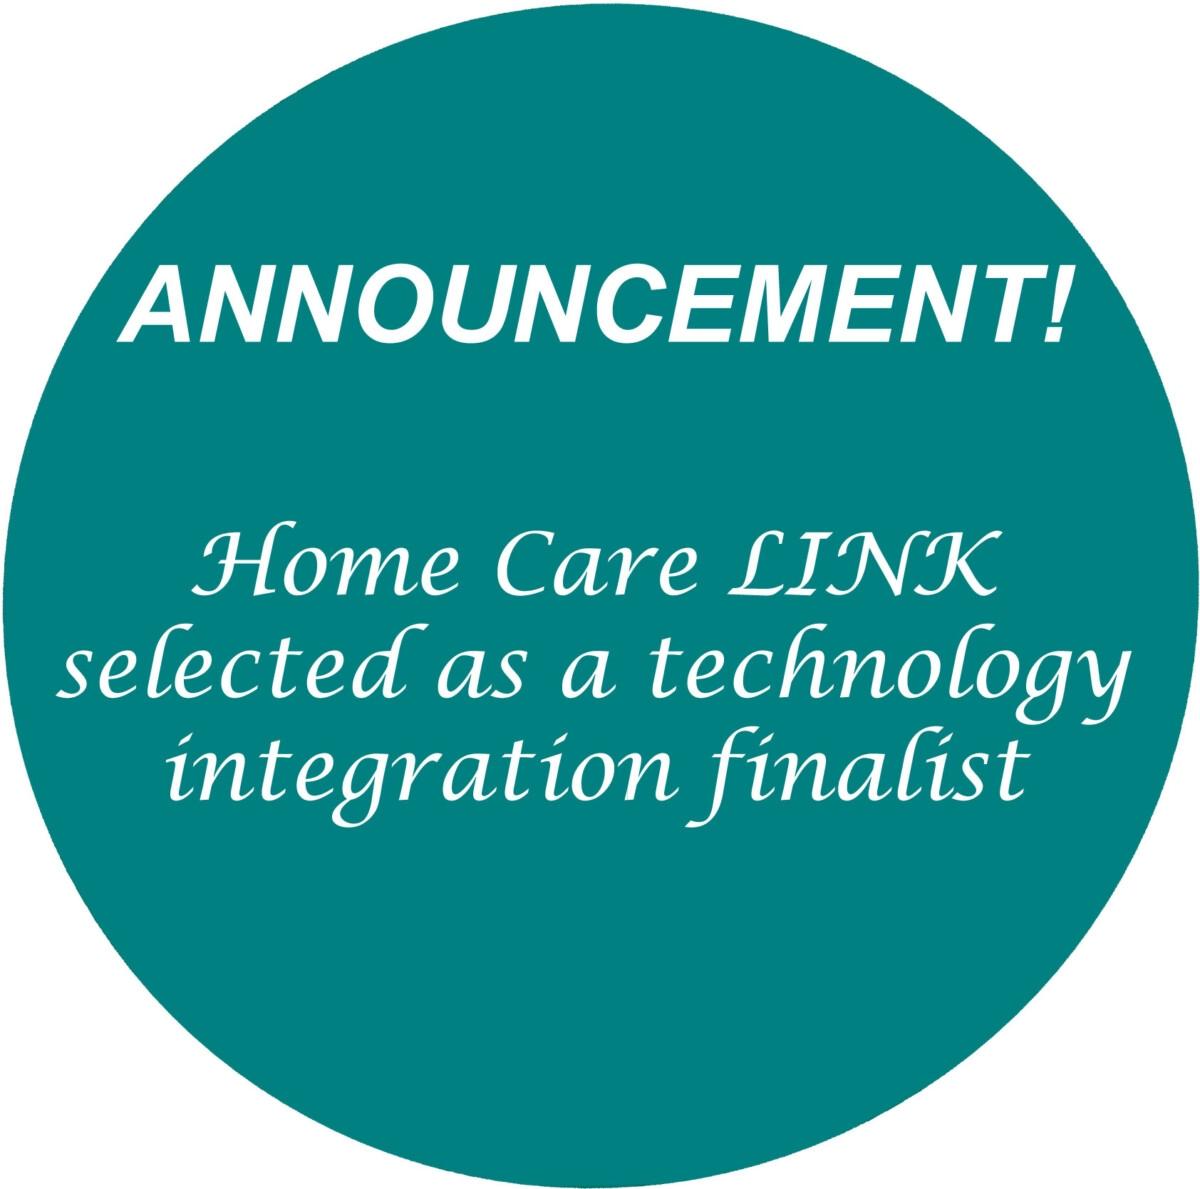 Home Care LINK selected as a technology integration finalist